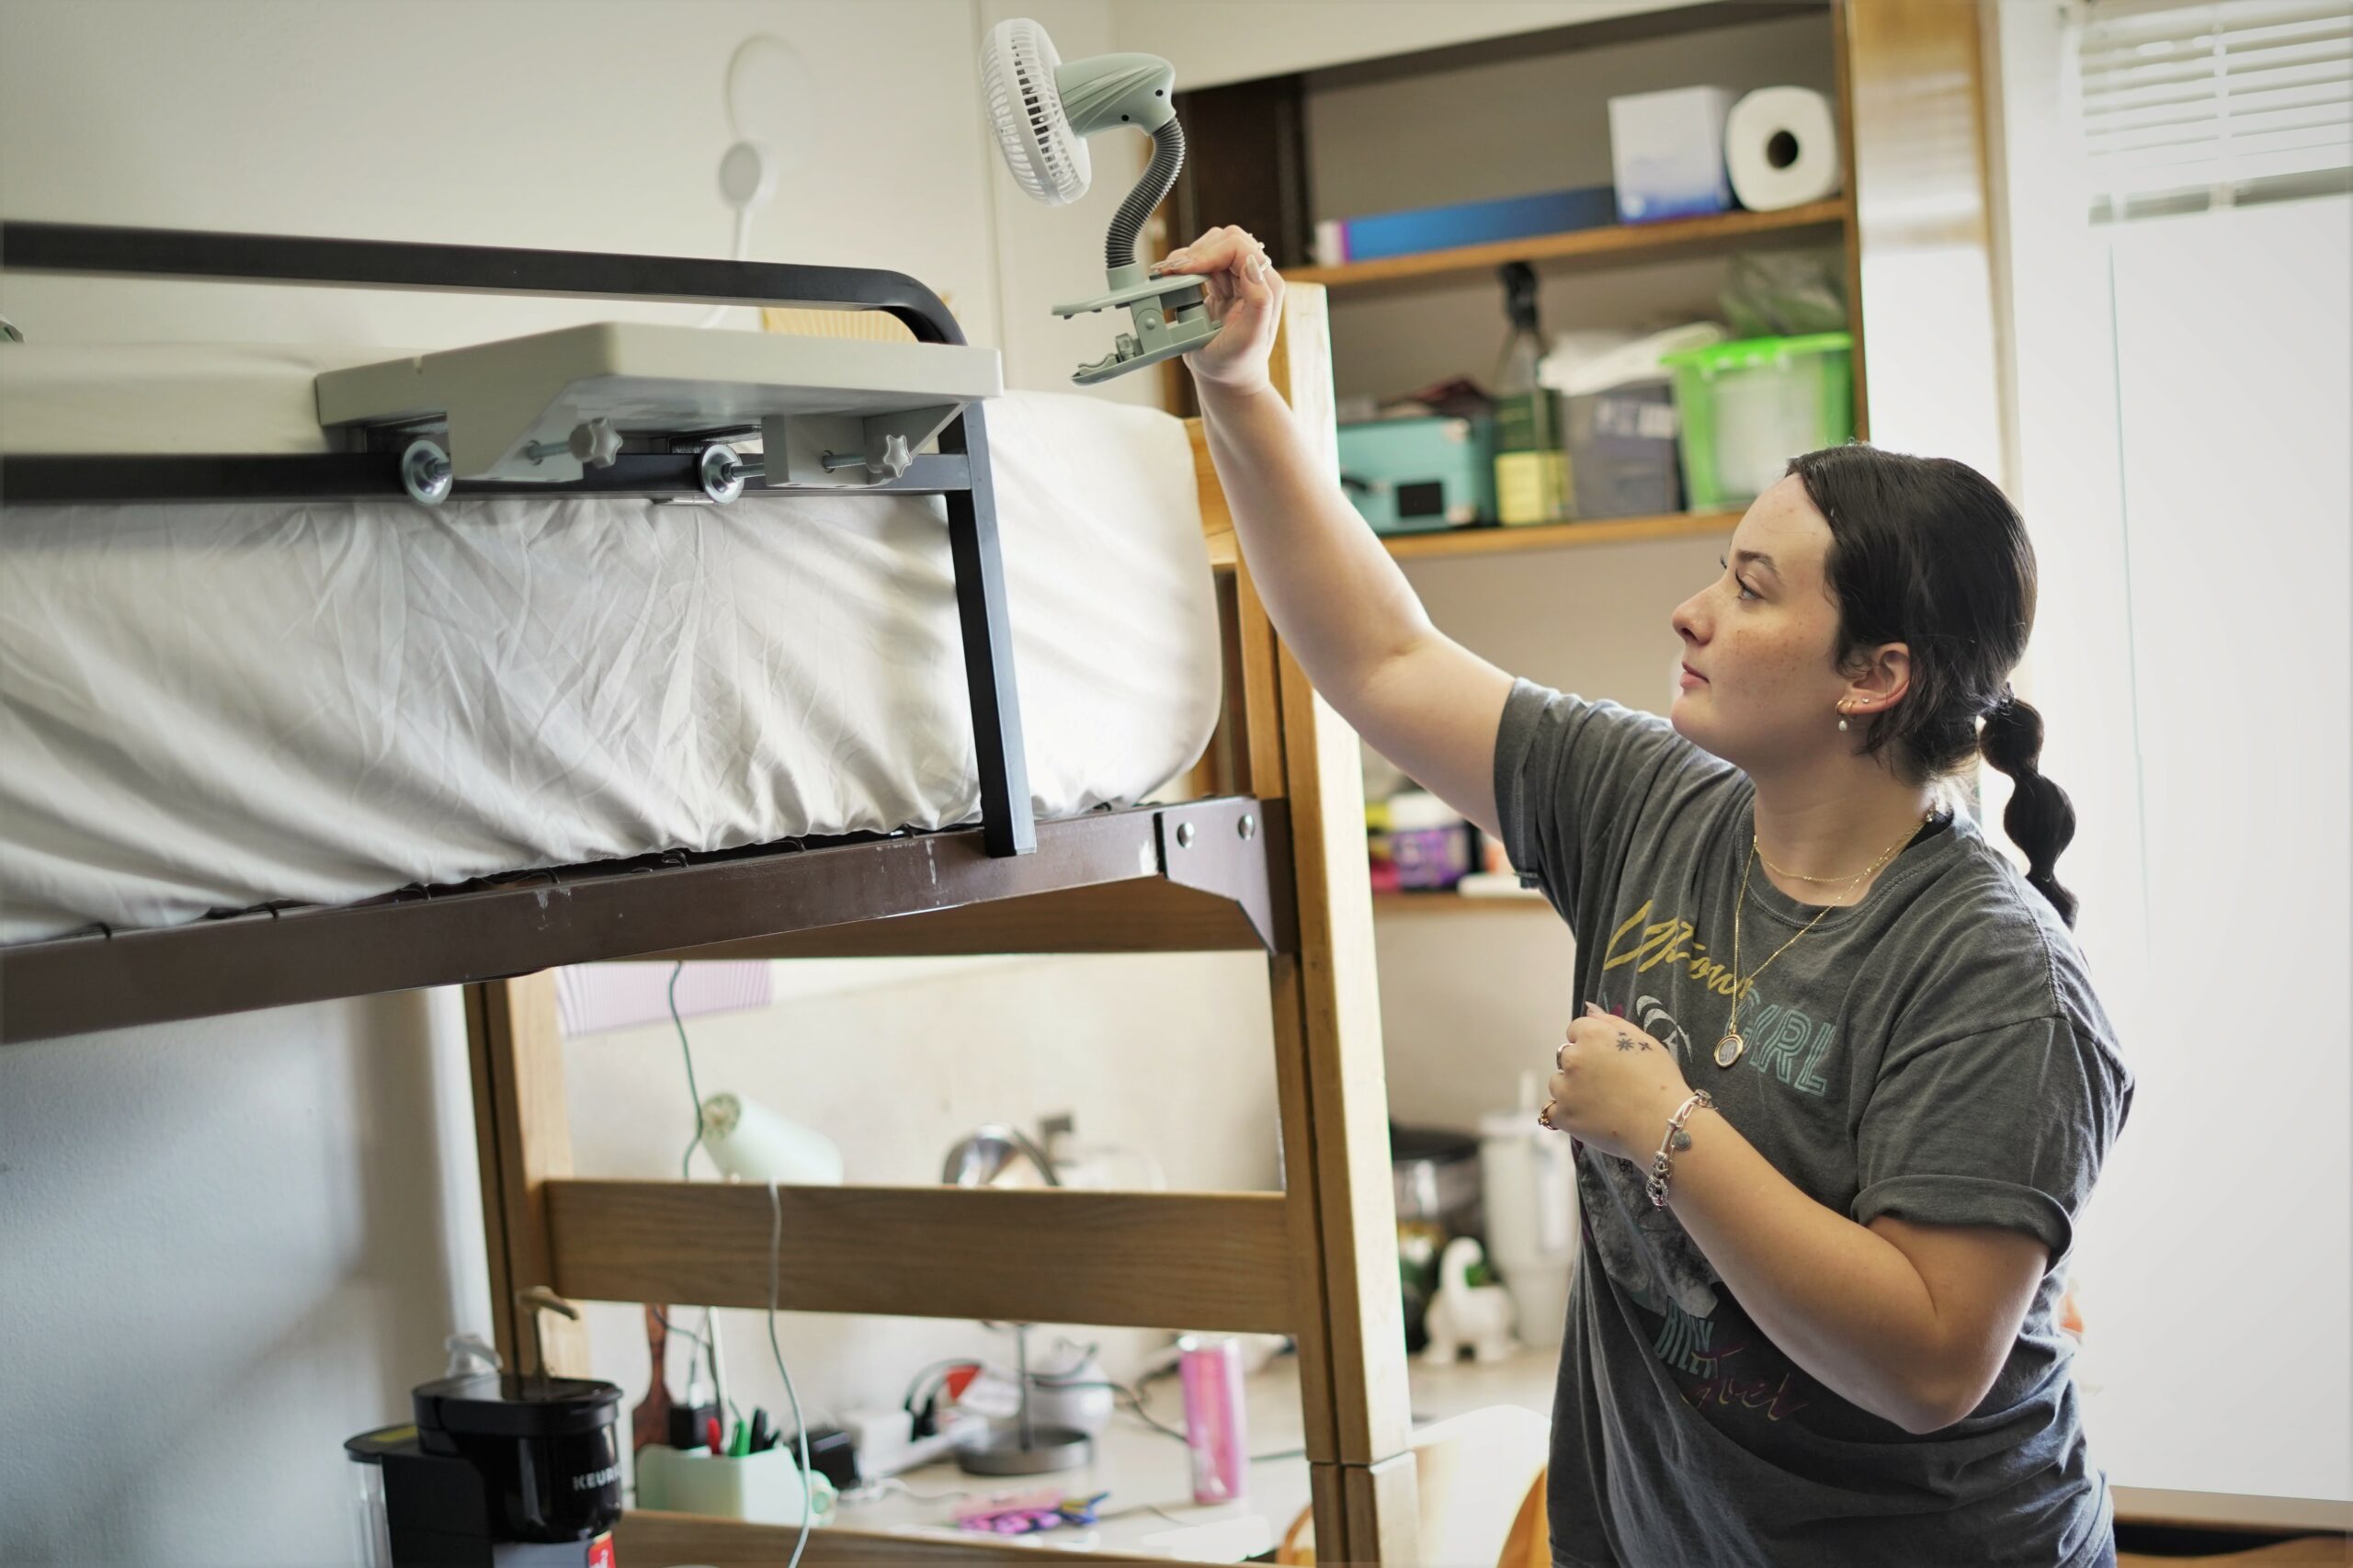 A student unpacks in her new dorm room inside Tamarack Hall during move-in day on campus on Thursday, Aug. 17, 2023. (Micah Friez / Bemidji State)